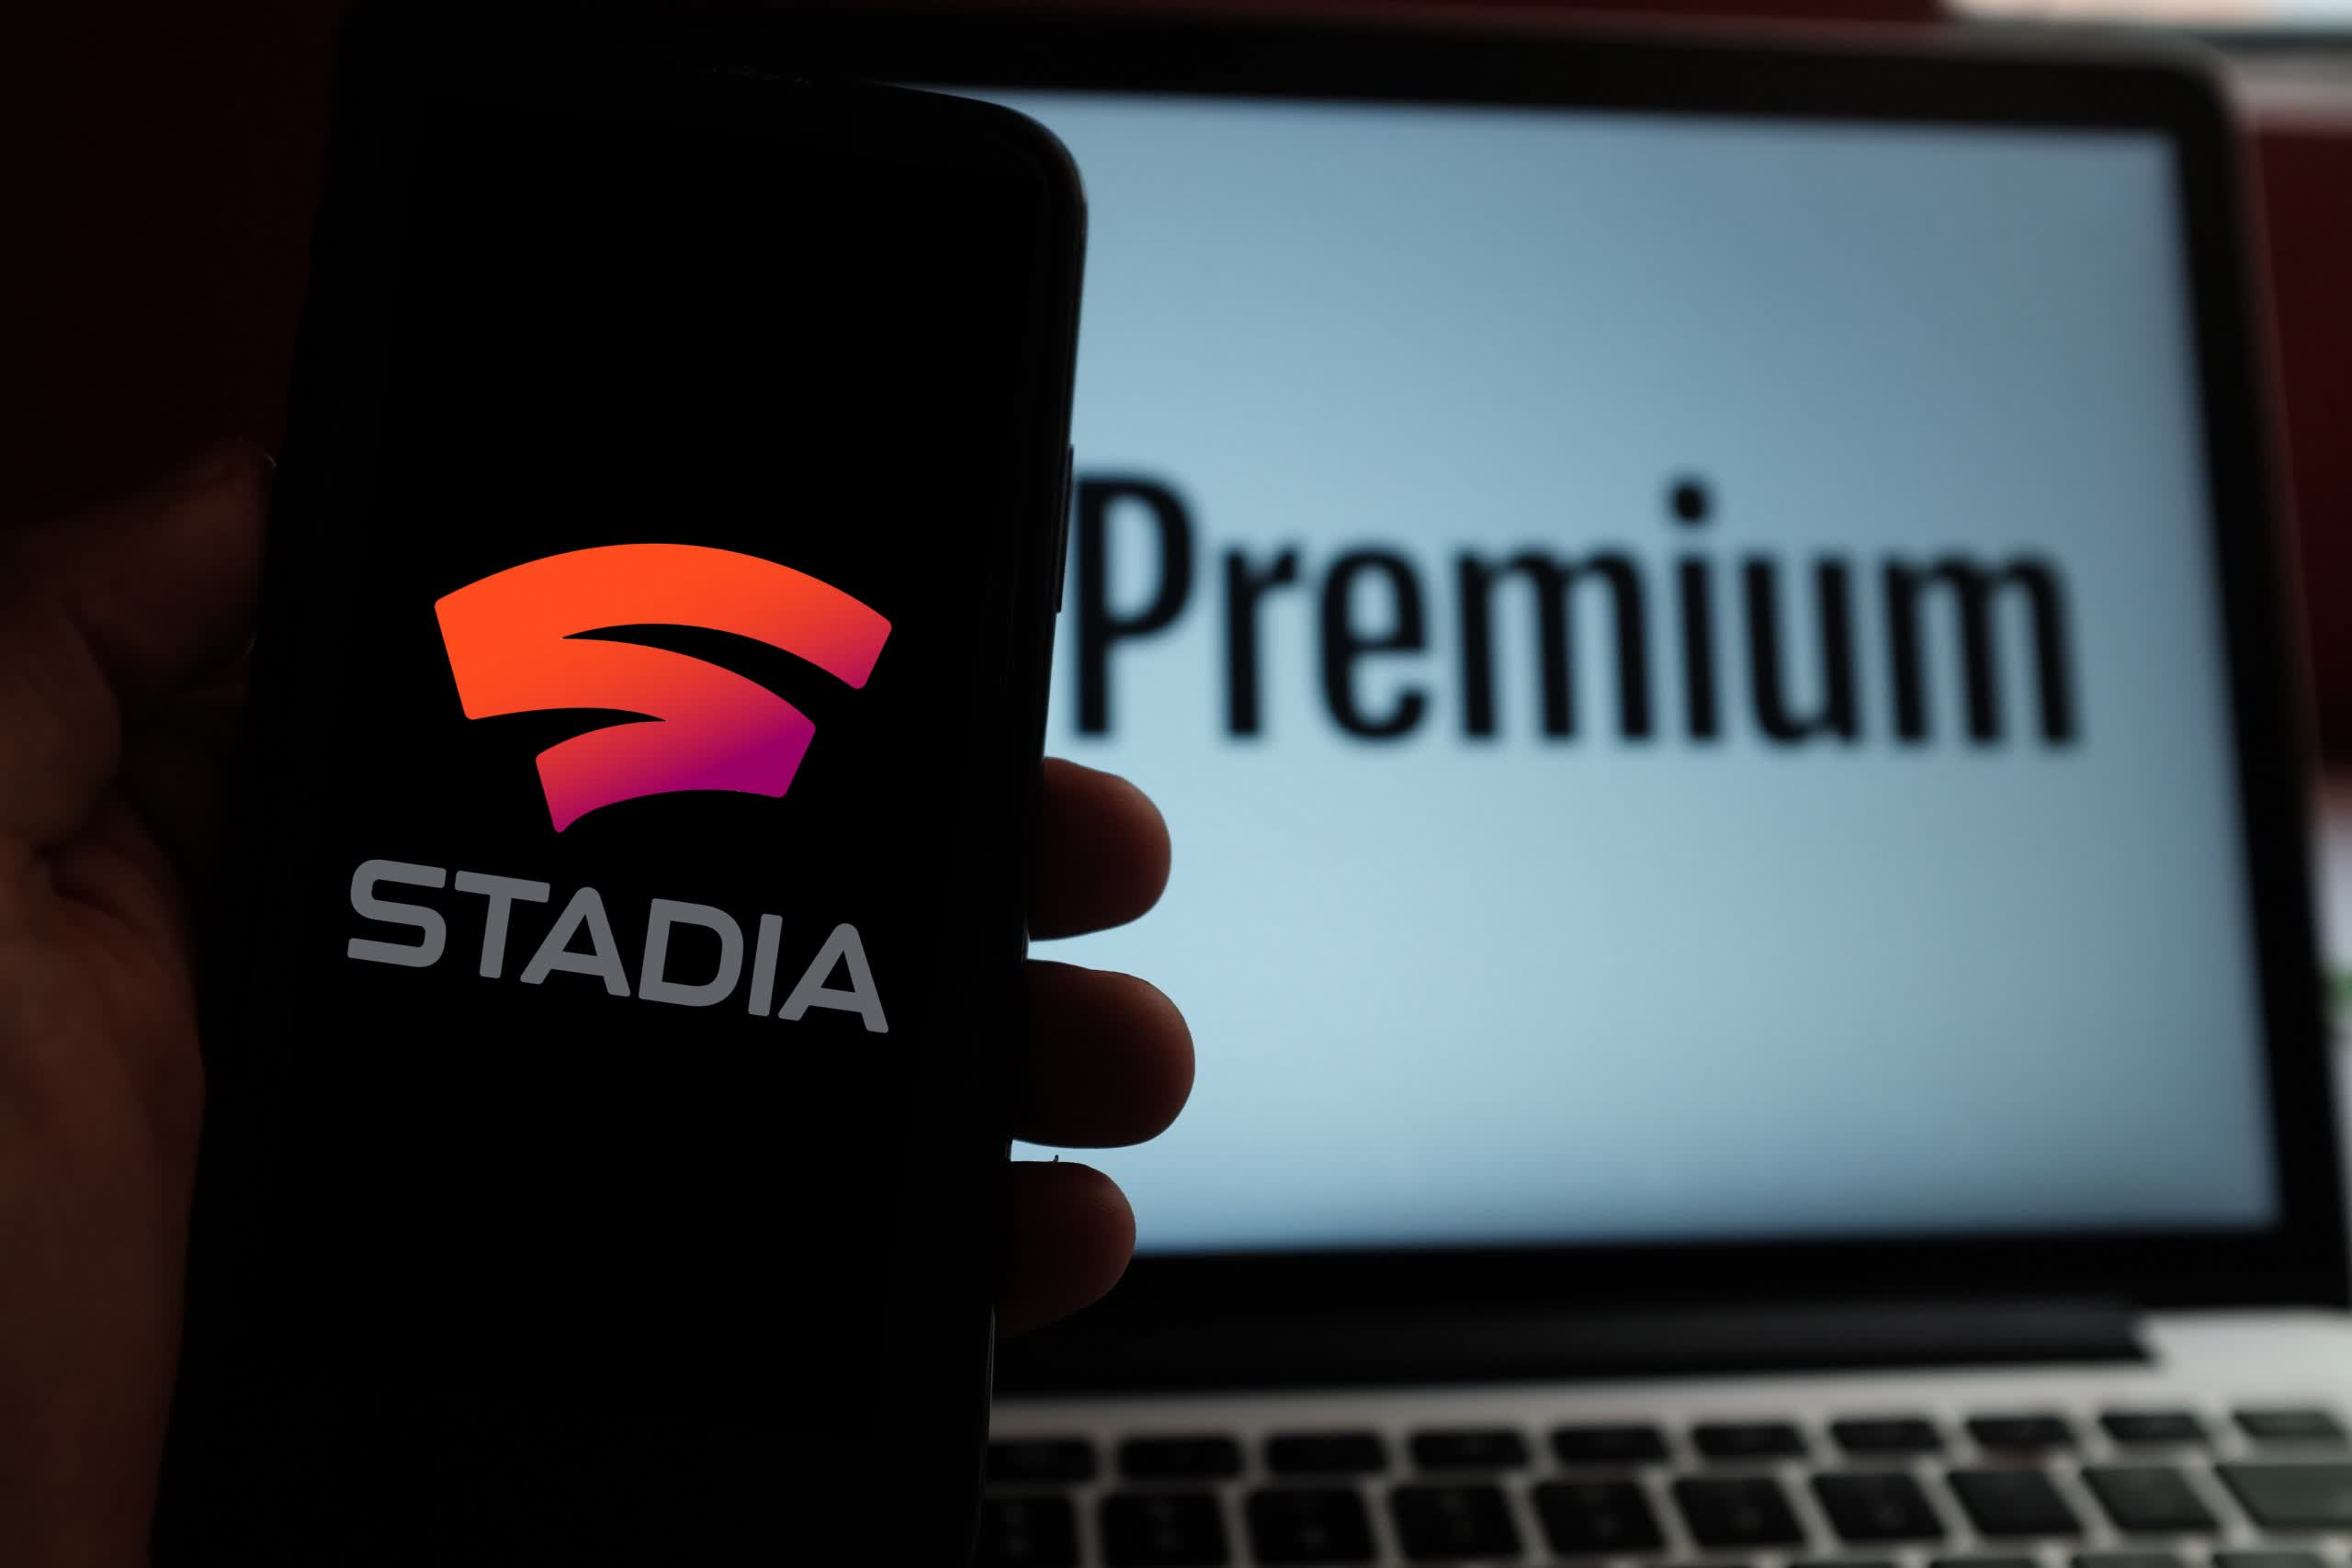 YouTube Premium subscribers can claim a Stadia gaming bundle for free